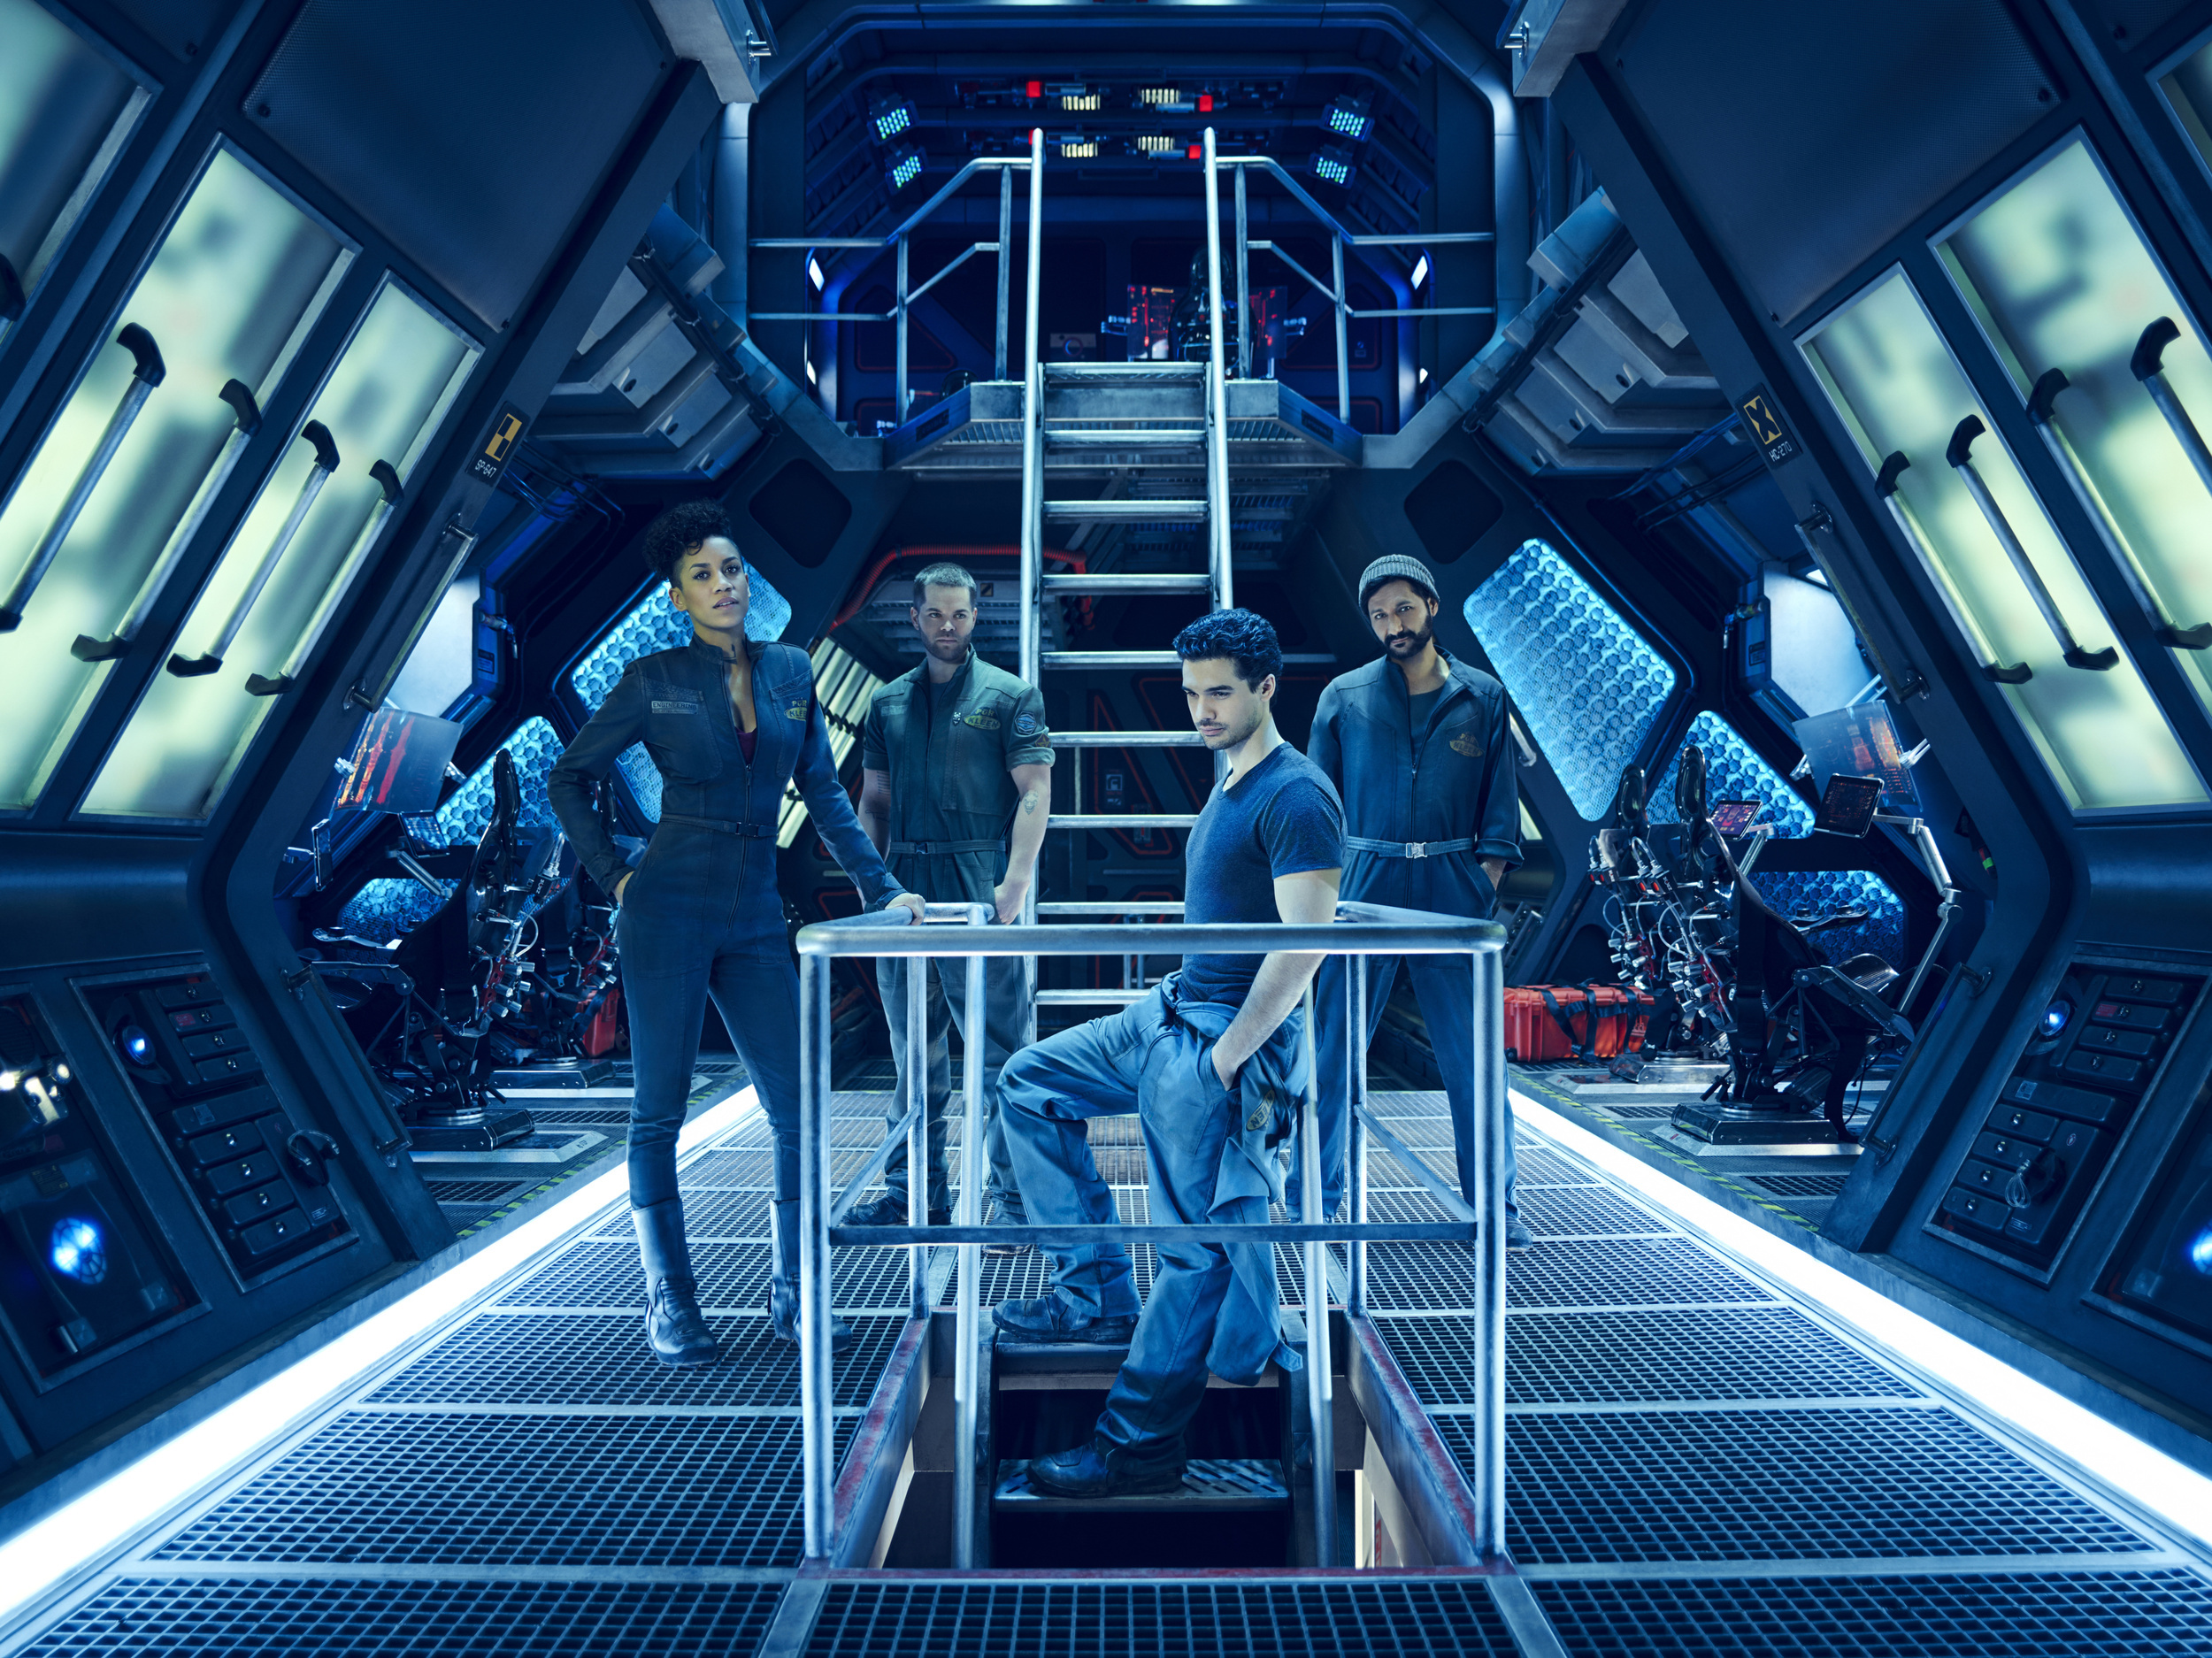 <p><em>The Expanse</em> <span>is arguably one of the best series to have appeared on the network Syfy. Based on James S.A. Corey’s series of novels, the show is very much invested in examining technology, politics, and personal agency. It’s a sprawling story, but it remains anchored by the characters at the story’s heart. Unlike some adaptations, it remains largely faithful to its source material, even as it also embarks on its own path, with cinematography almost unlike anything else seen either on Syfy or television more generally. It’s a testament to what science fiction can look like when it takes big and bold risks. </span></p><p><a href='https://www.msn.com/en-us/community/channel/vid-cj9pqbr0vn9in2b6ddcd8sfgpfq6x6utp44fssrv6mc2gtybw0us'>Follow us on MSN to see more of our exclusive entertainment content.</a></p>